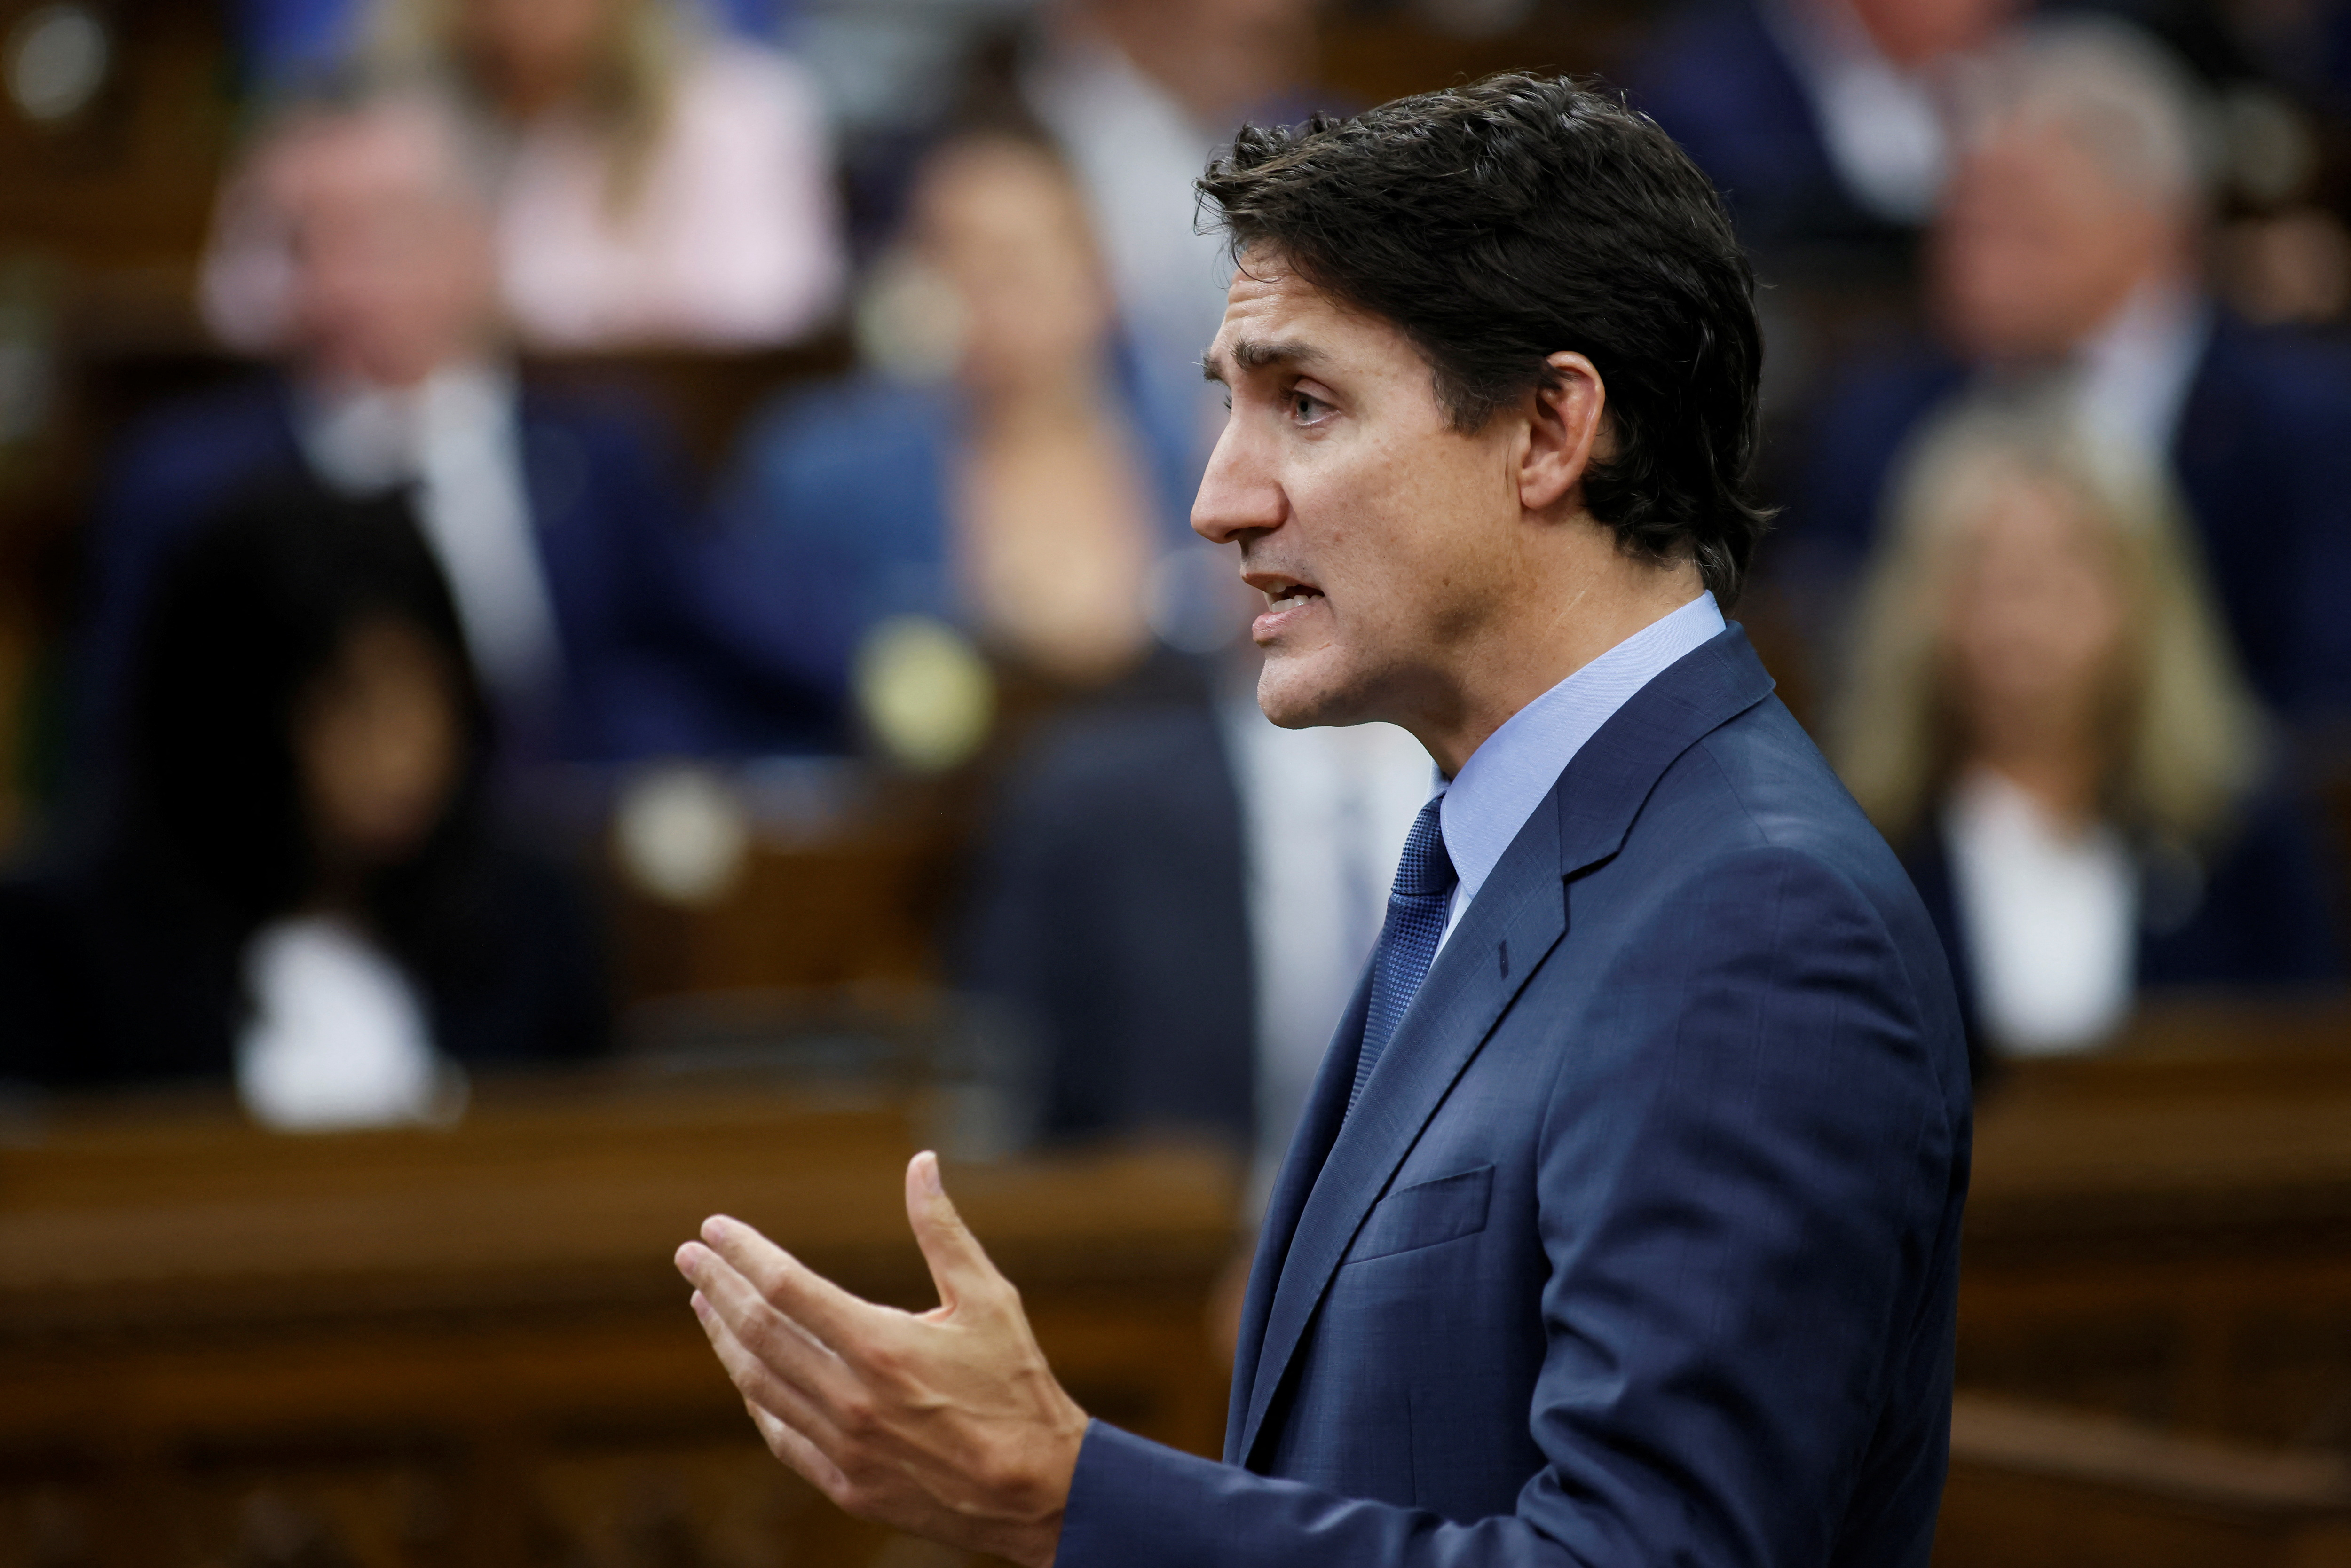 Canada's Prime Minister Trudeau speaks during Question Period in the House of Commons on Parliament Hill in Ottawa